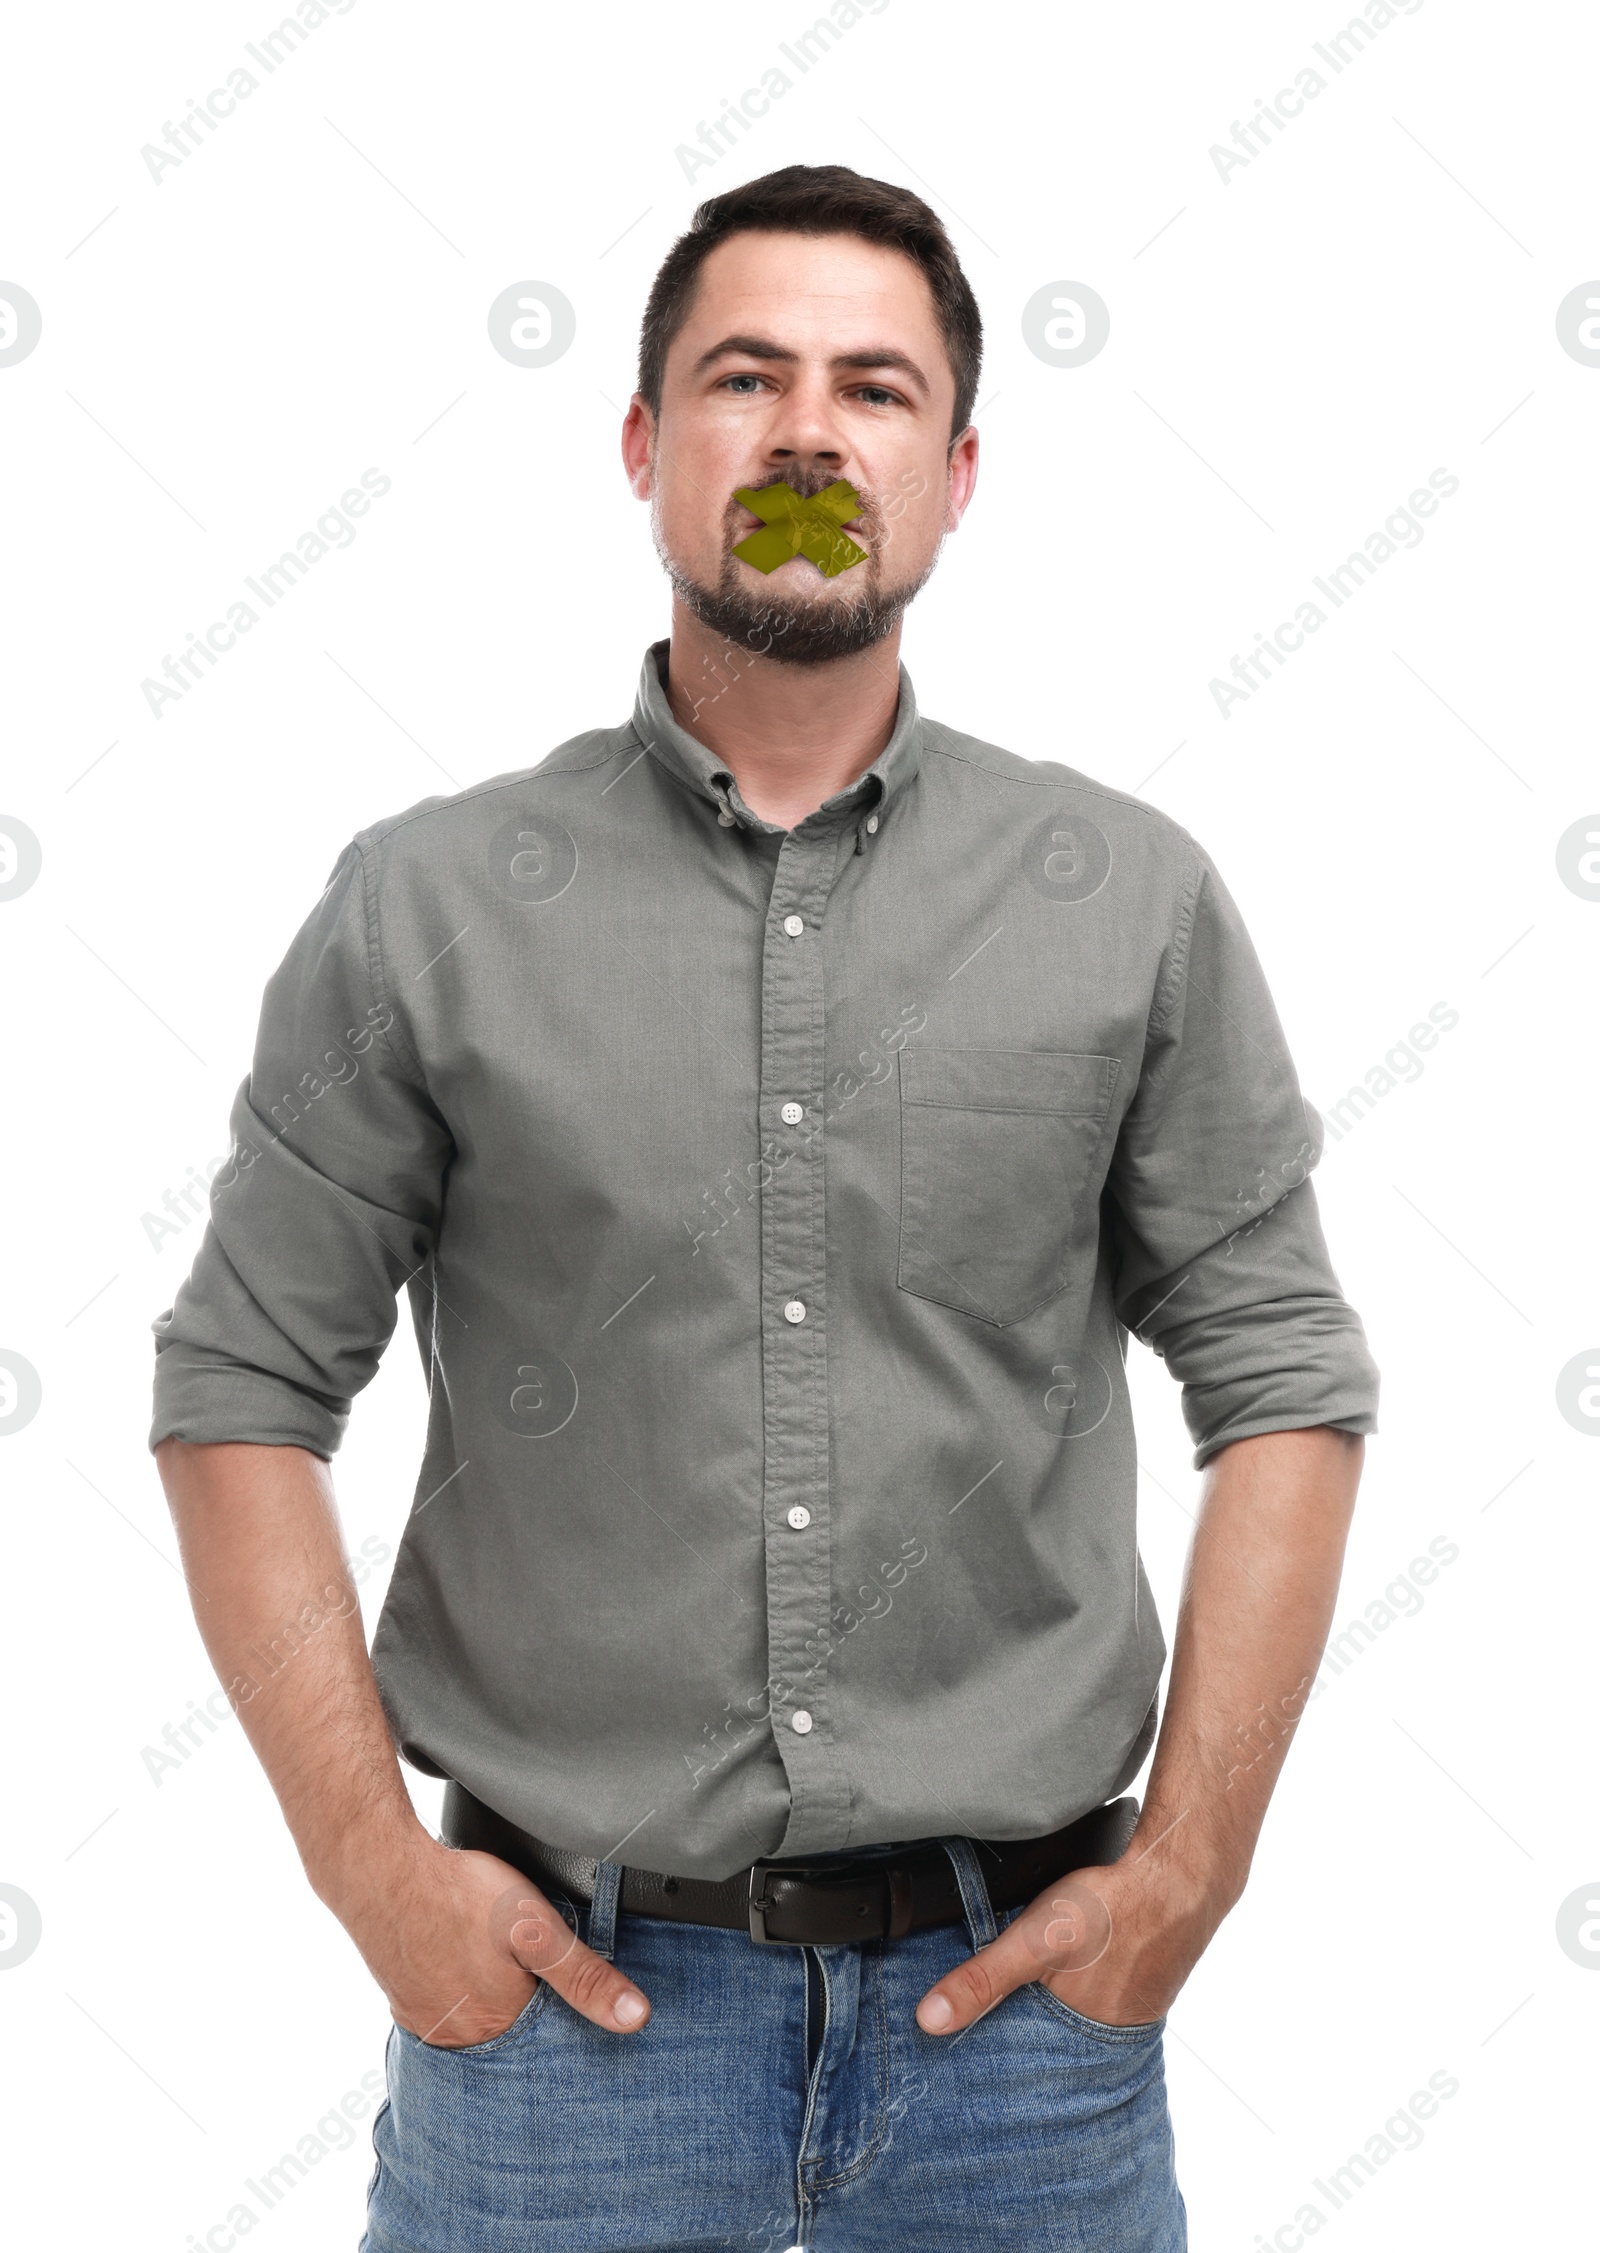 Image of Mature man with taped mouth on white background. Speech censorship